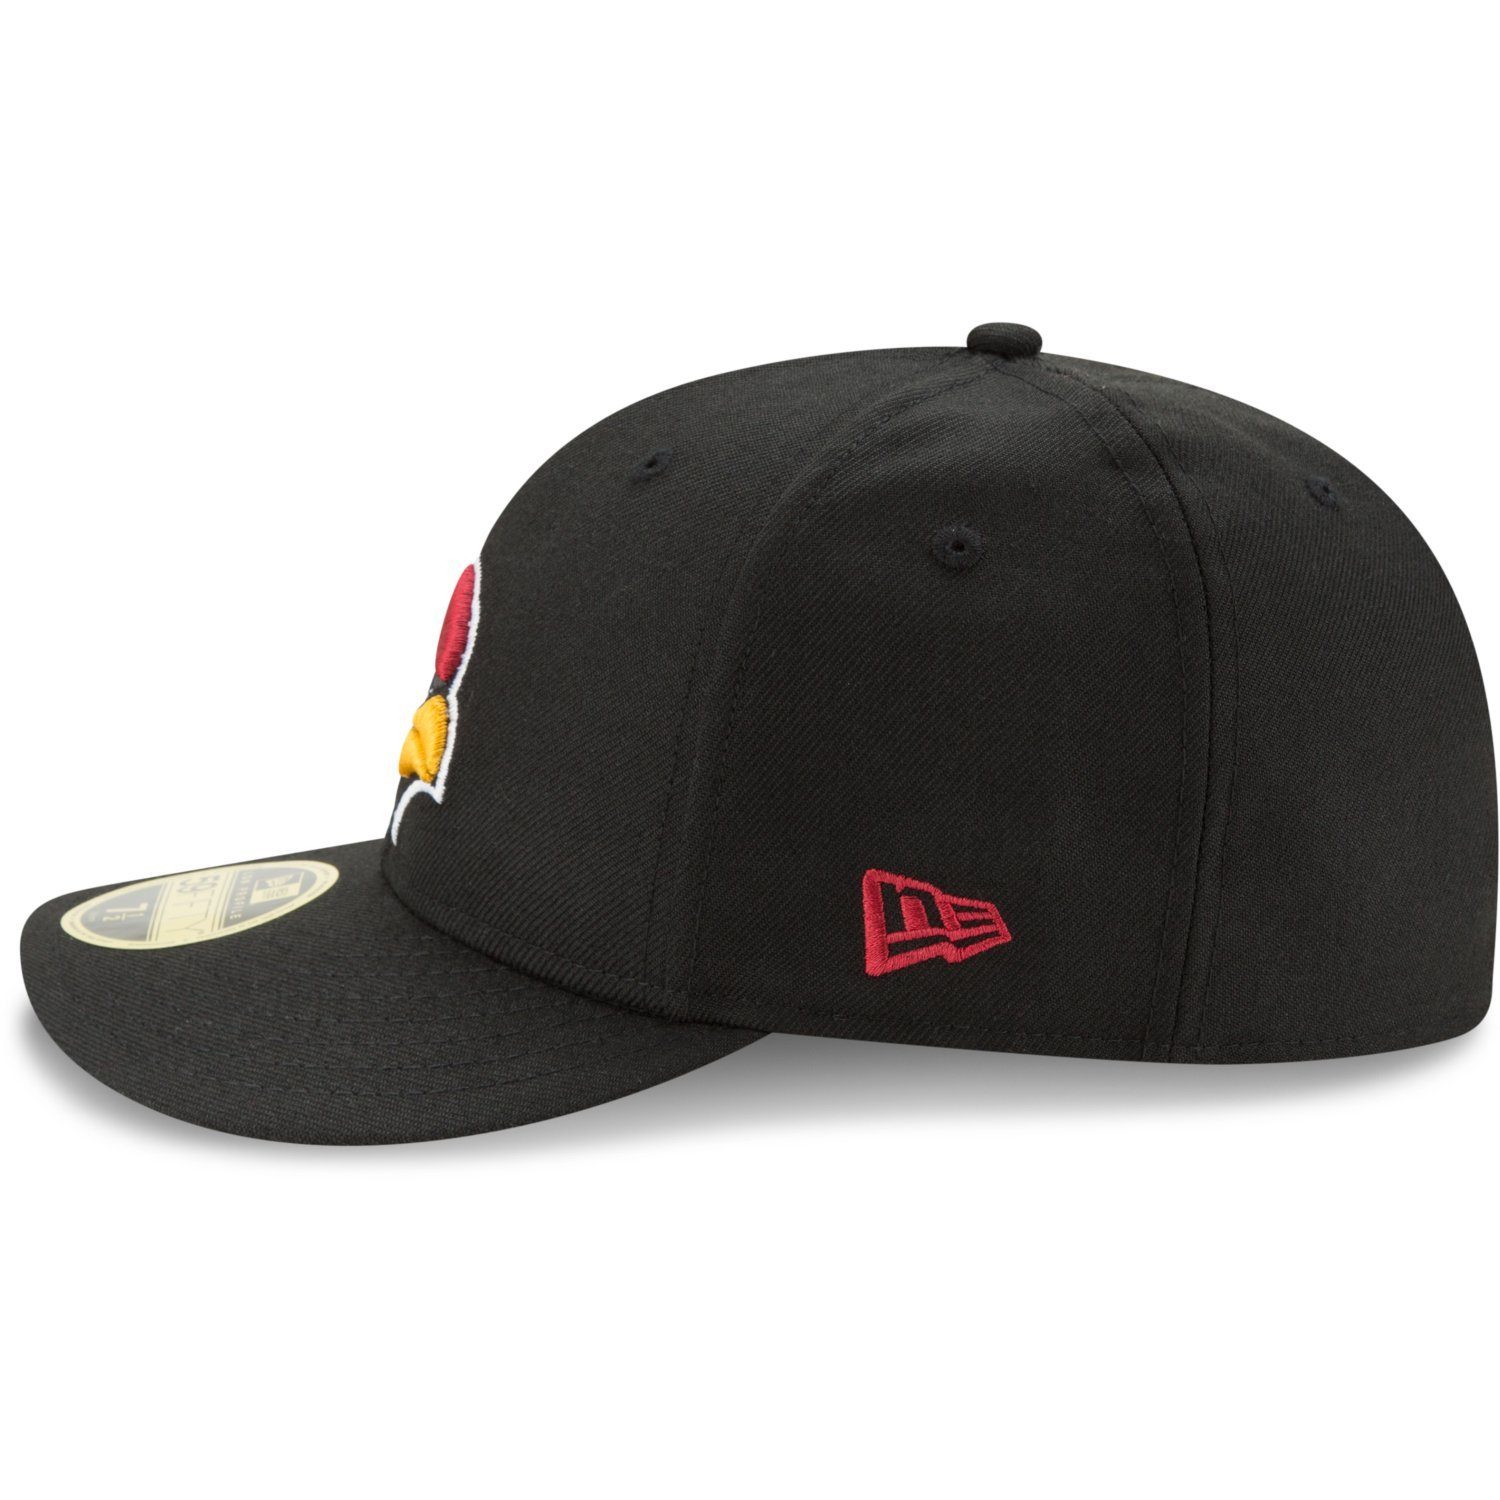 LOW Cap PROFILE Cardinals Era New 59Fifty Fitted Arizona